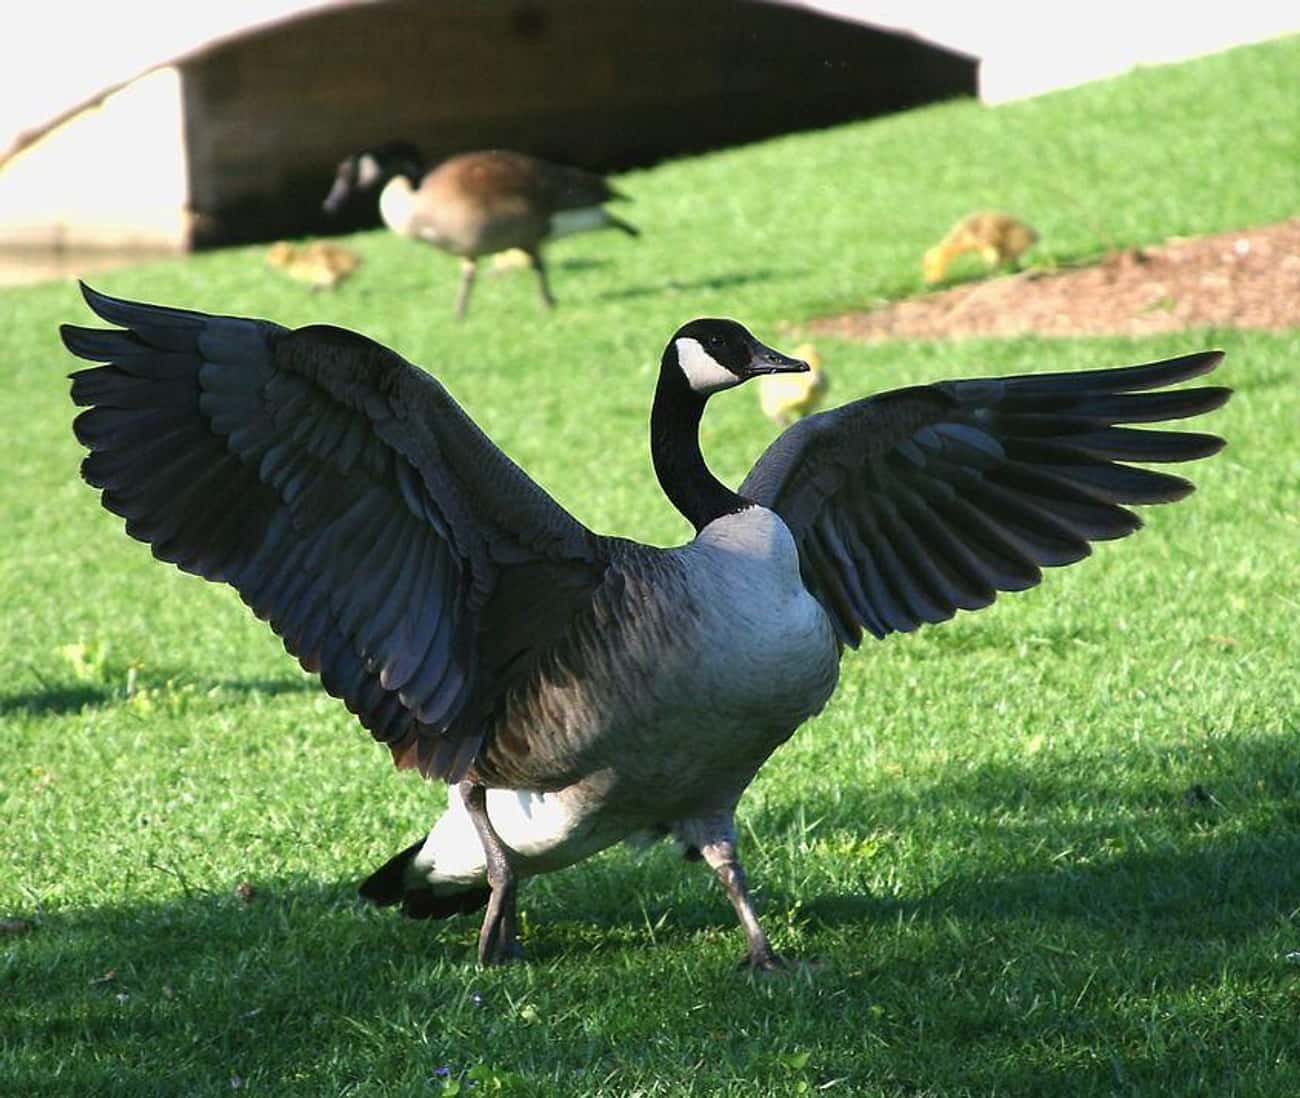 Geese Are Really Intense About Guarding Their Hidden Nests